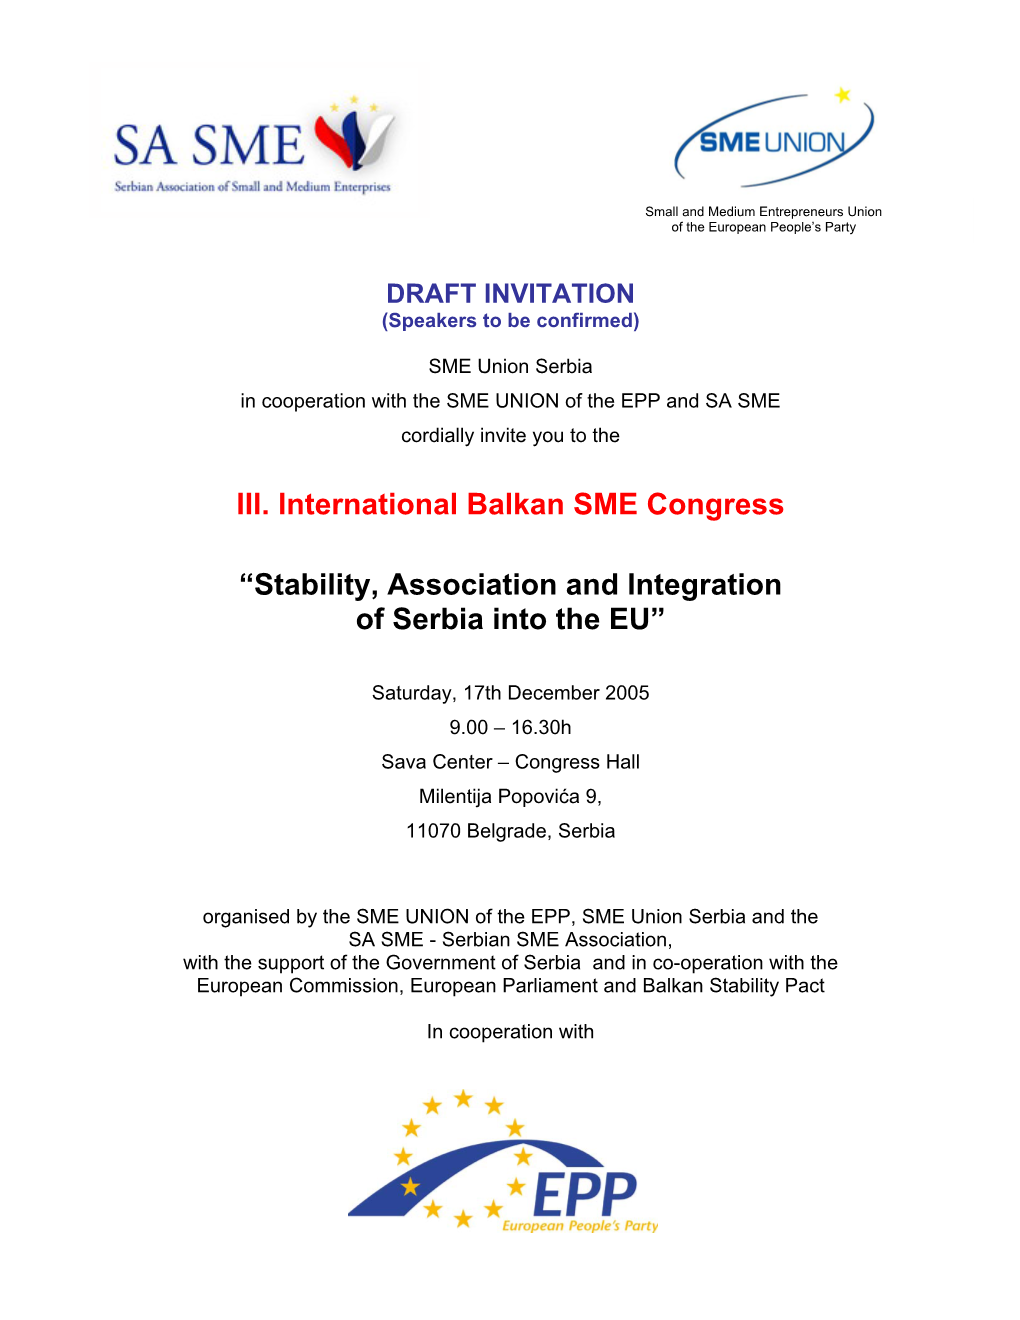 III. International Balkan SME Congress “Stability, Association and Integration of Serbia Into The